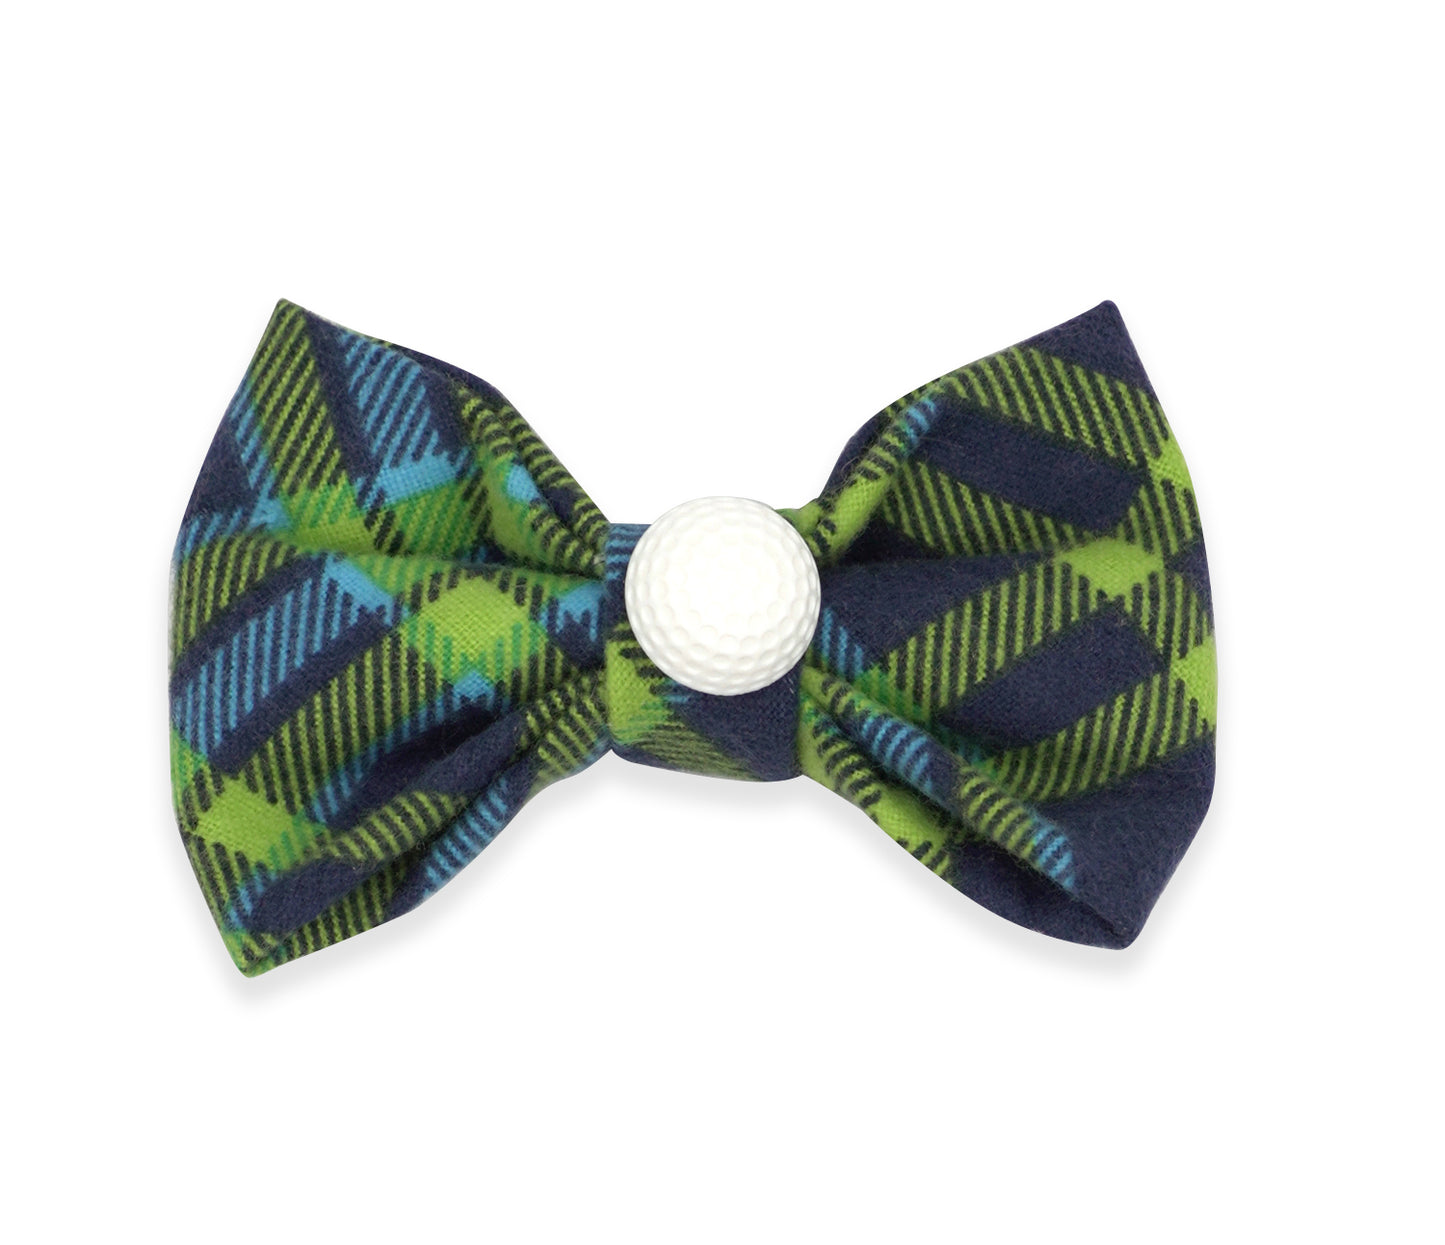 Handmade polyester bow tie for dogs (or other pets). Elastic straps on back with snaps make it easy to add to collar, harness, or leash. Bright blue, navy blue and bright green plaid with golf ball button in center of bow.